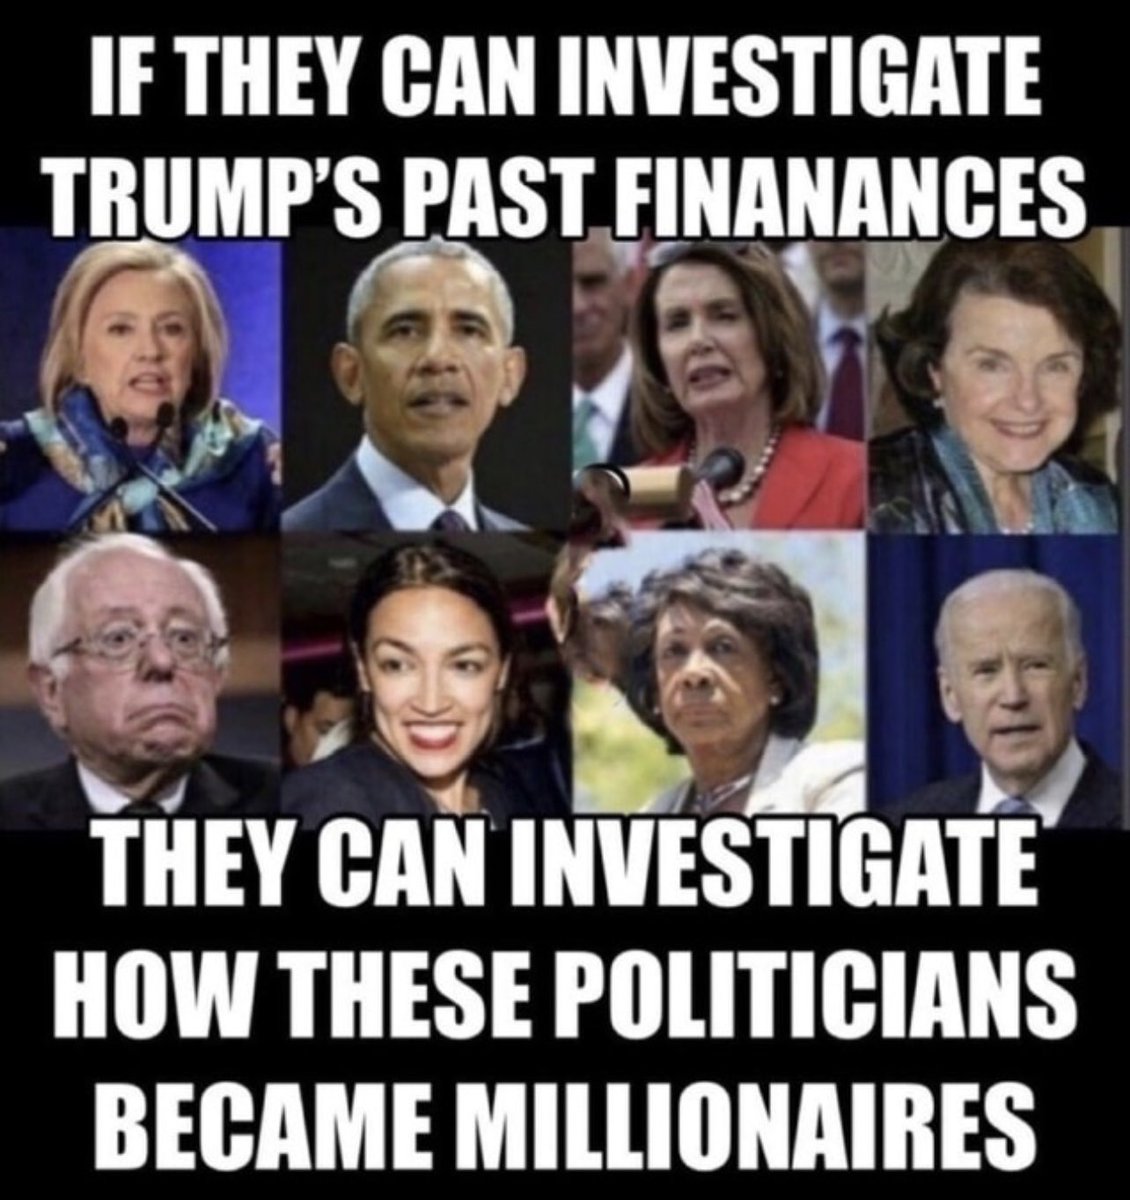 No one has immunity, ‘member? 

That’s been established. 

Who wants full investigations launched into their finances? 🙋‍♂️